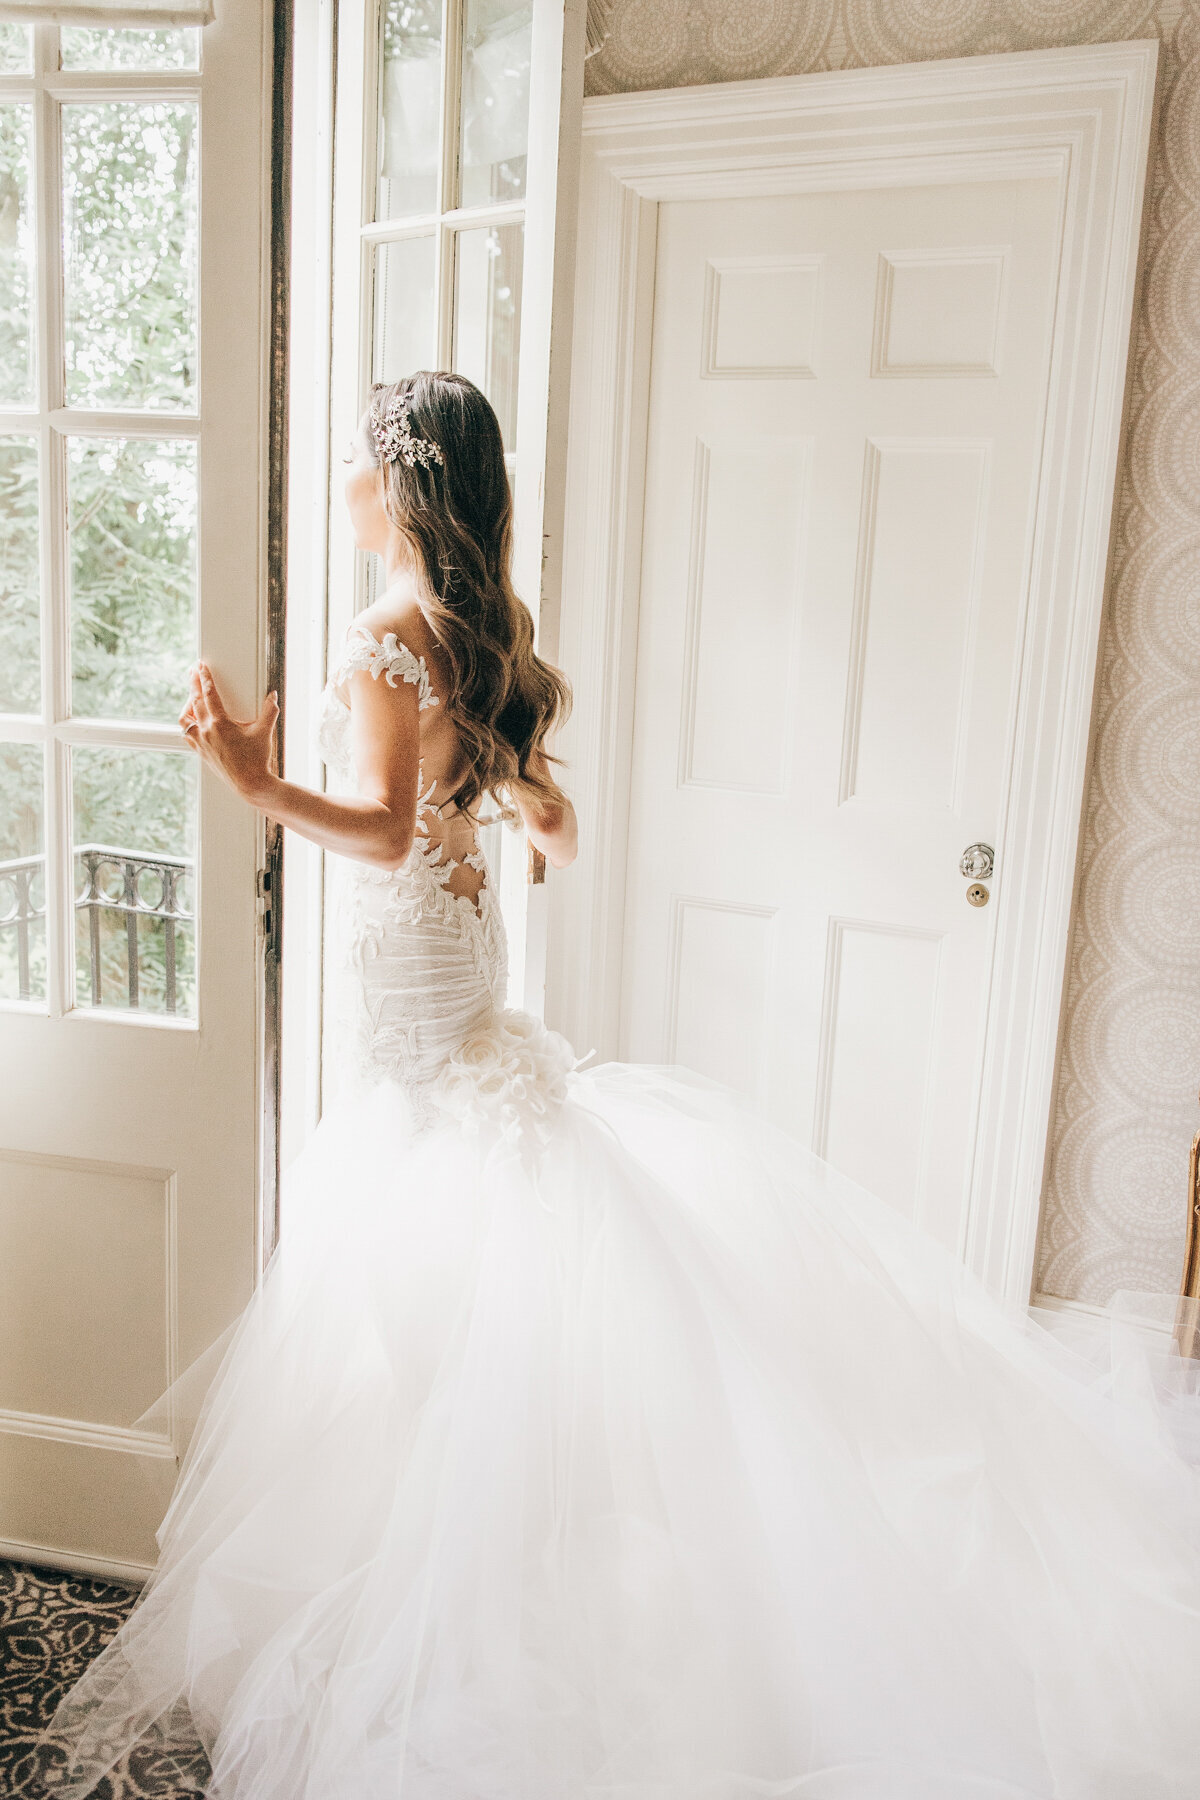 Glamorous portrait of bride looking out french doors on her wedding day